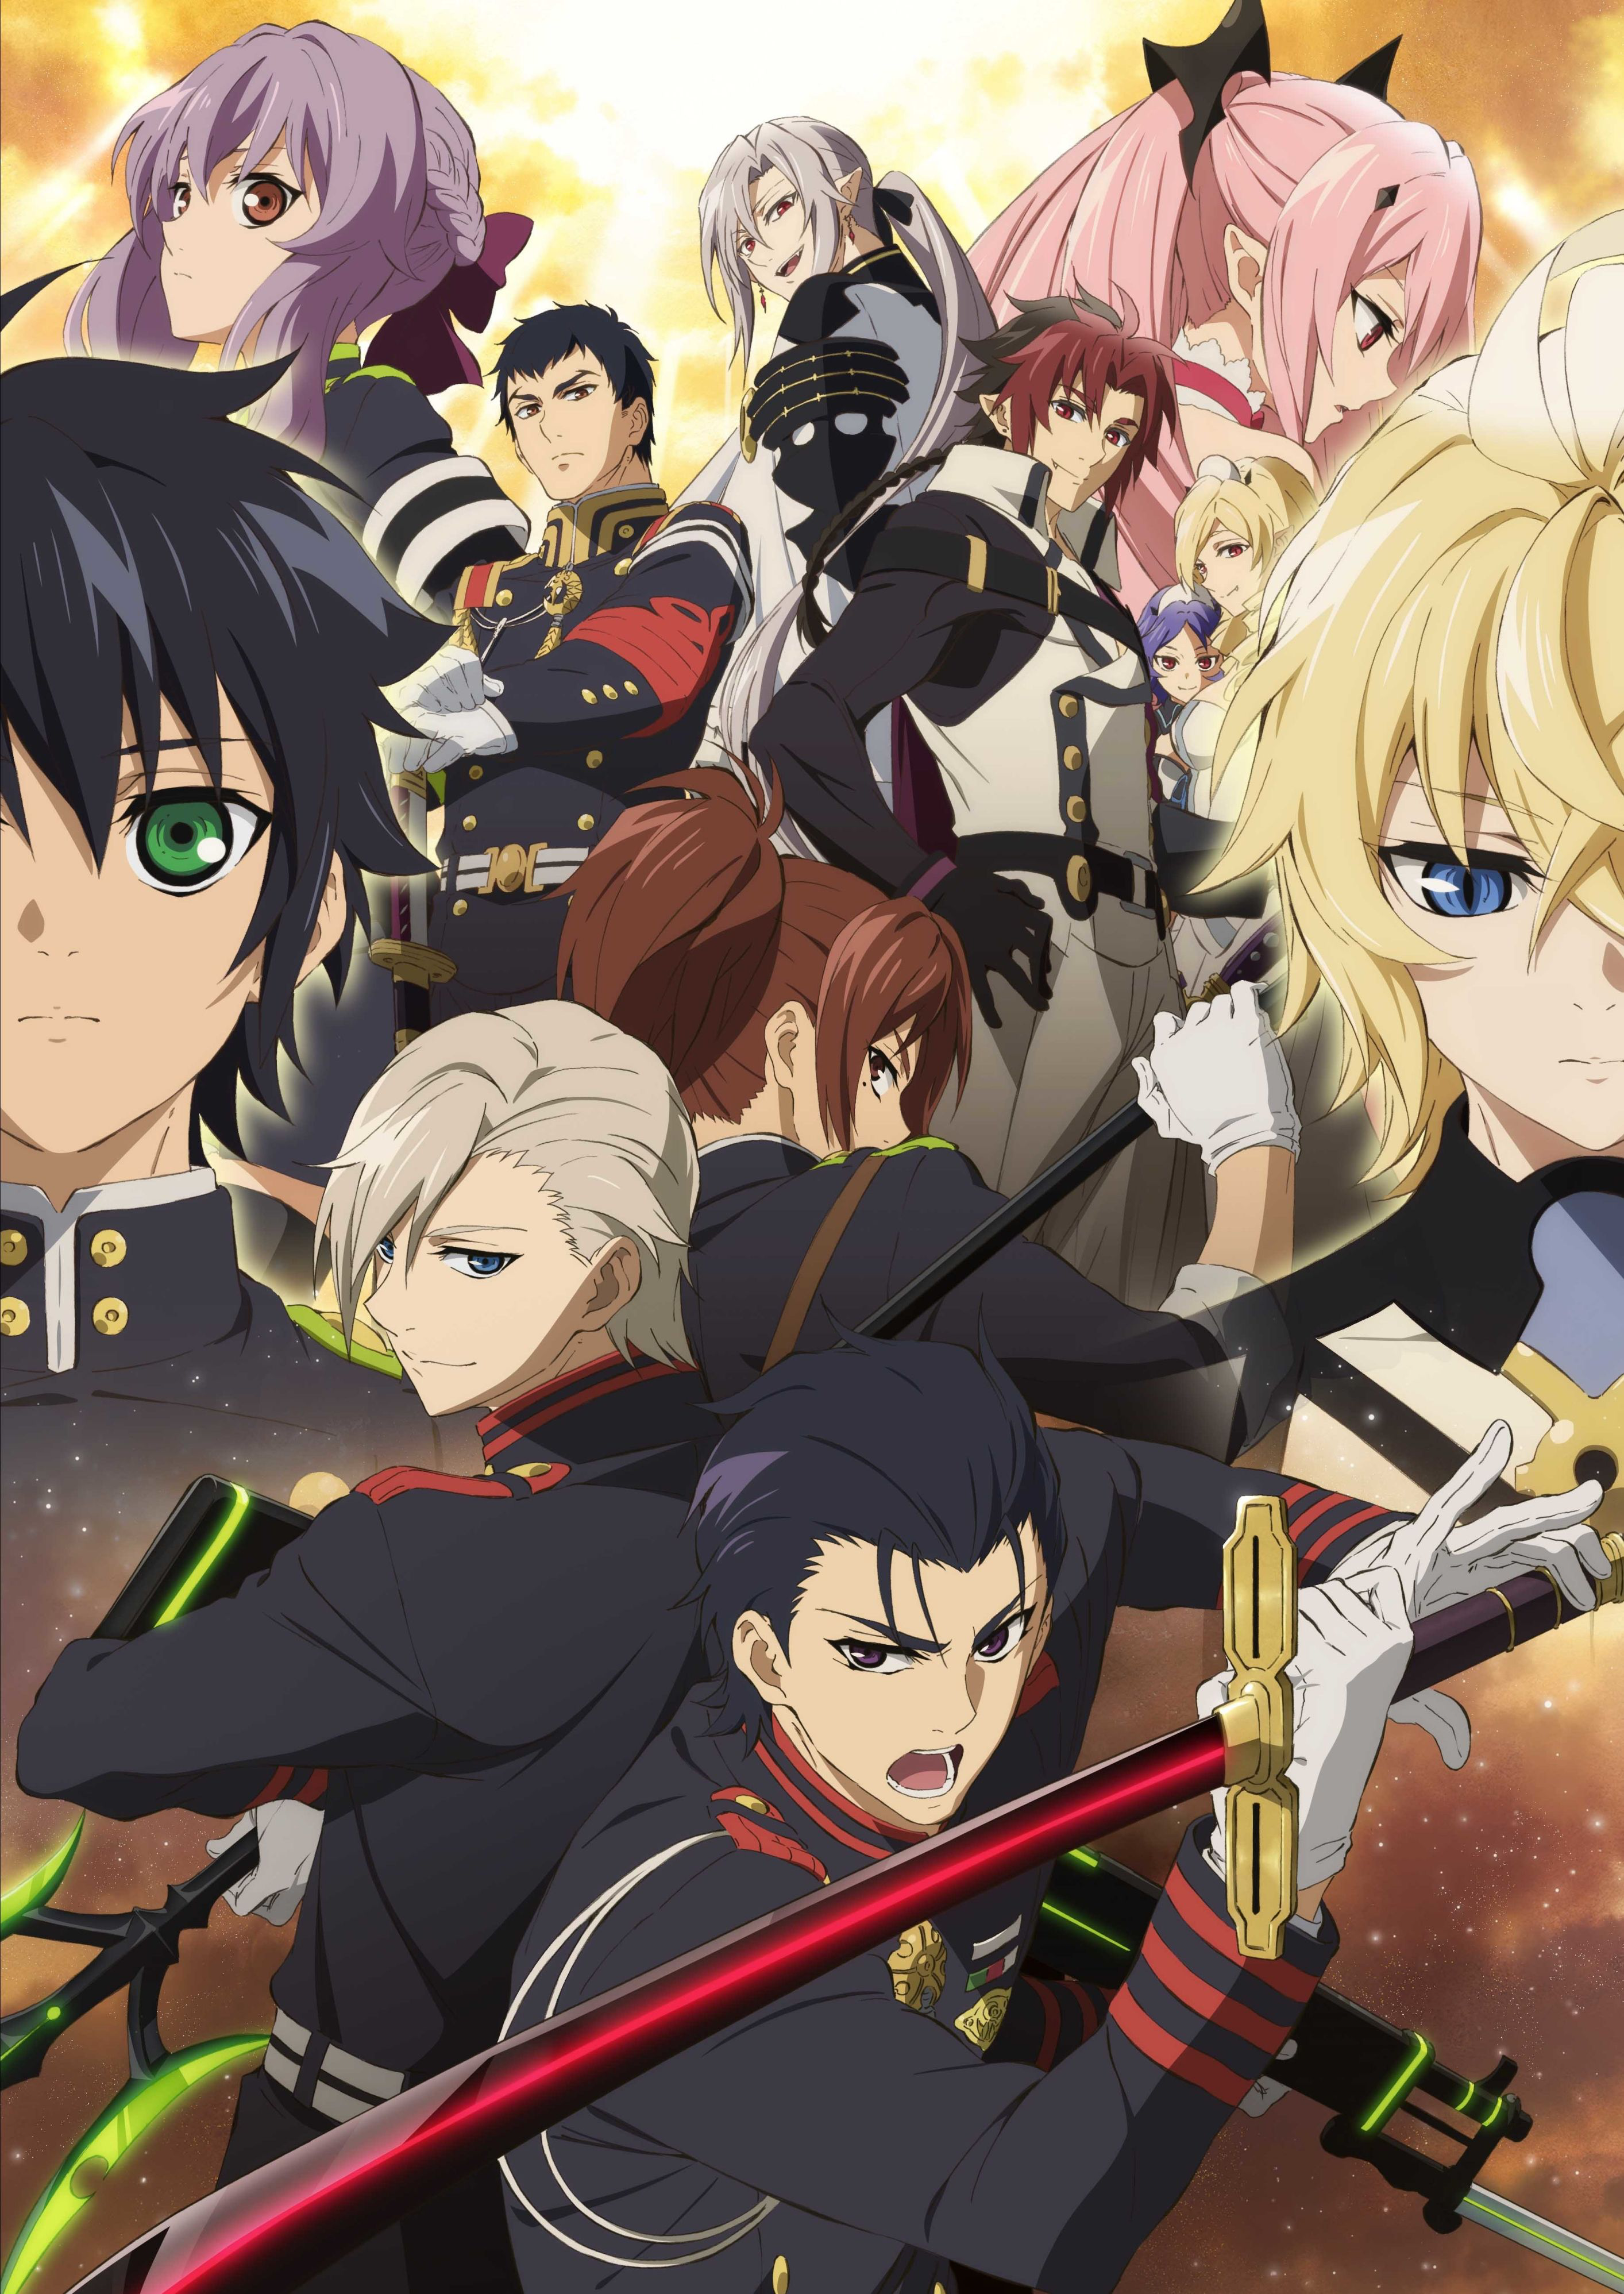 https://static.wikia.nocookie.net/owarinoseraph/images/b/b6/Seraph_of_the_End_-_Battle_in_Nagoya_Key_Visual.png/revision/latest?cb=20201217000047